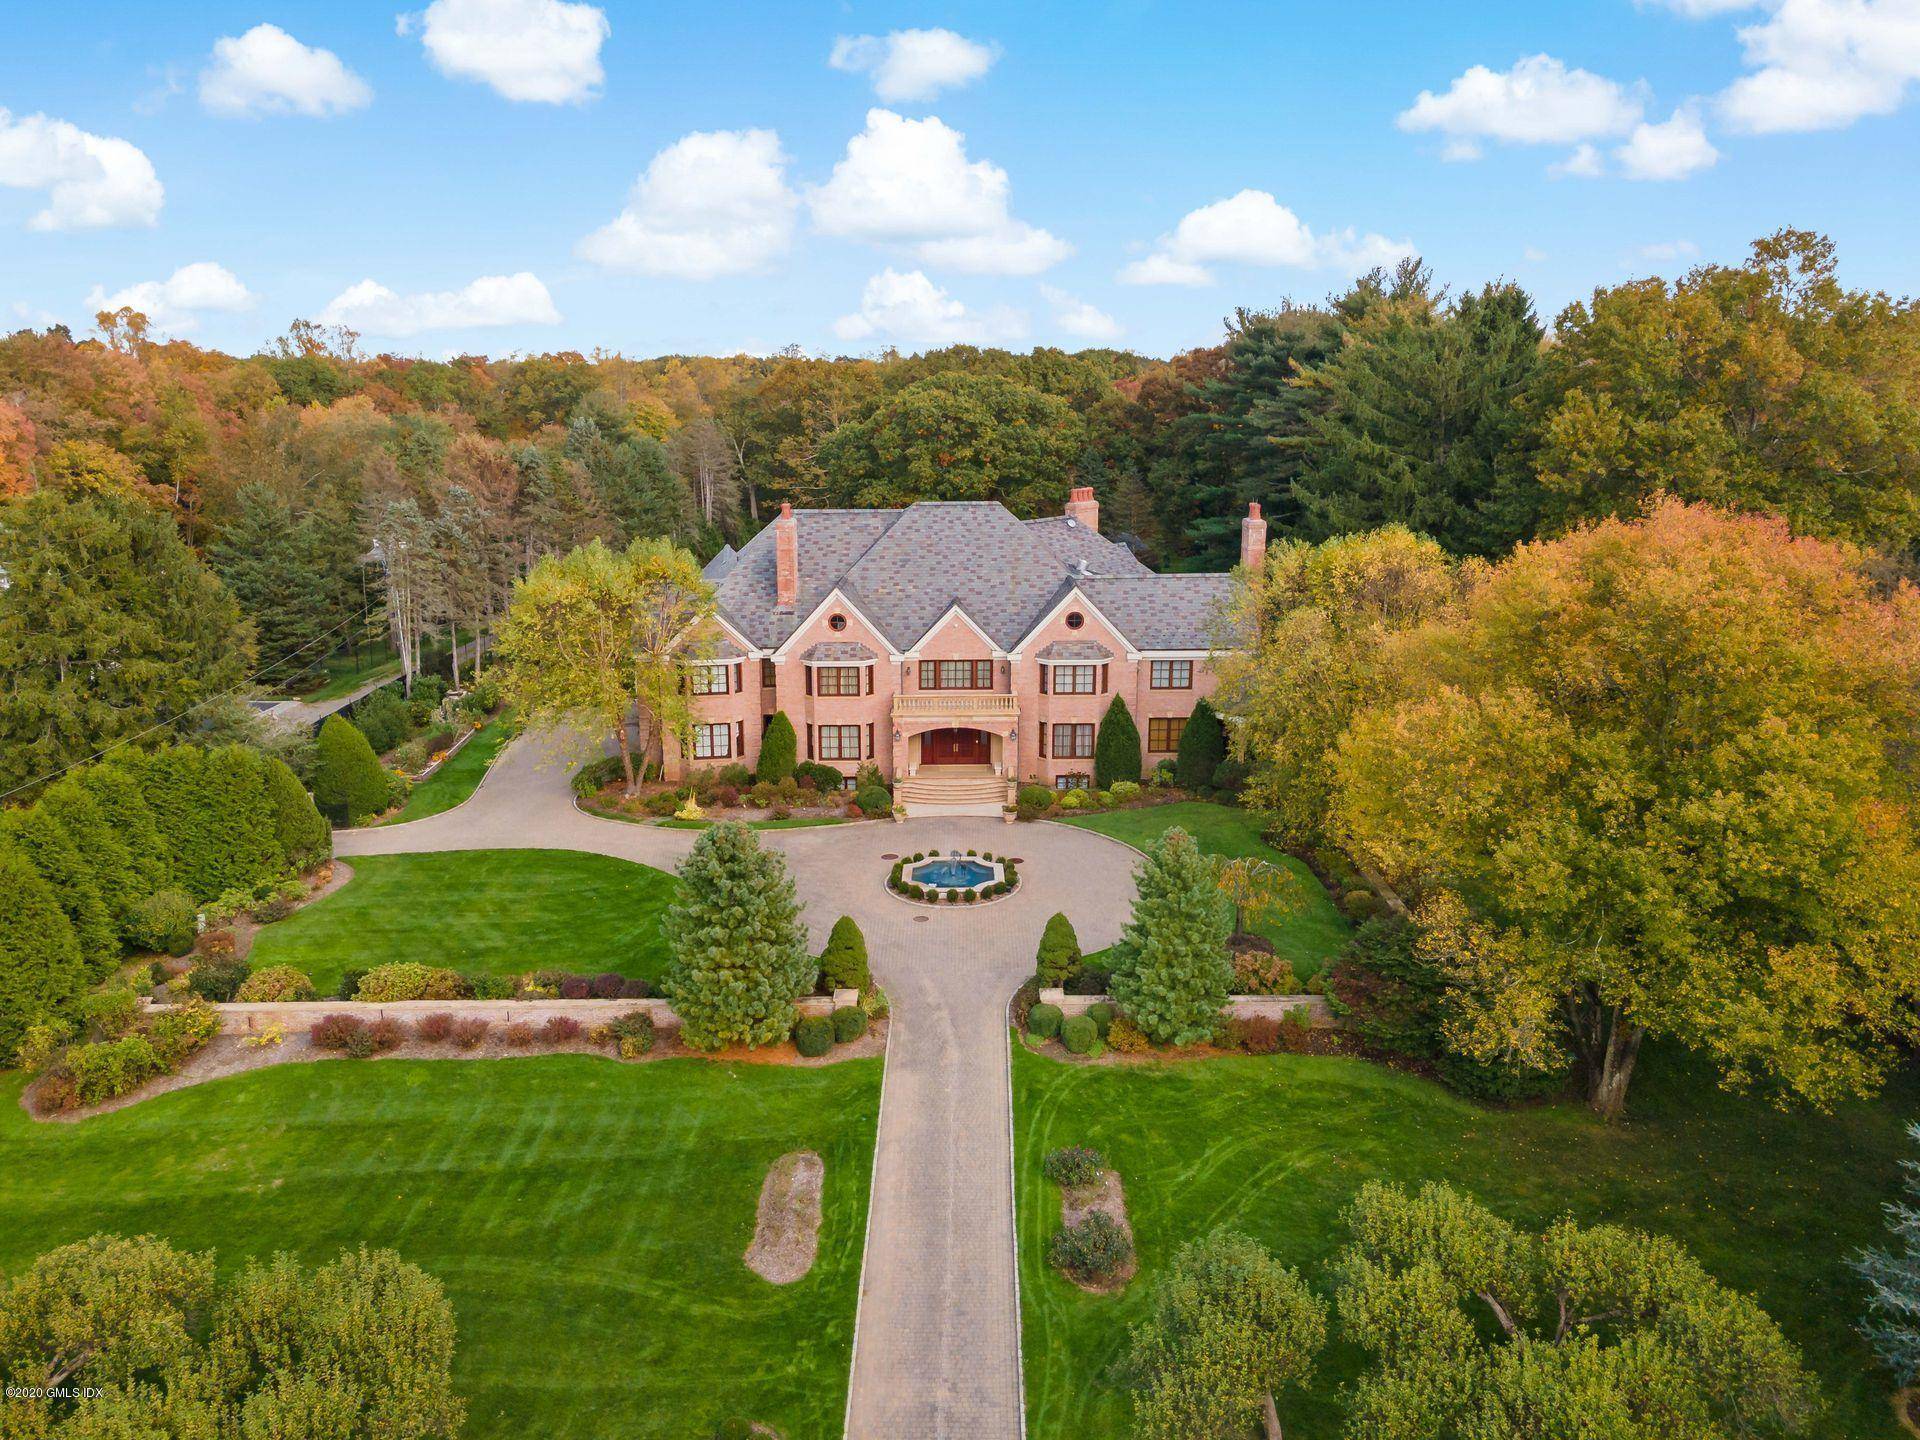 This exquisite country estate on 5.